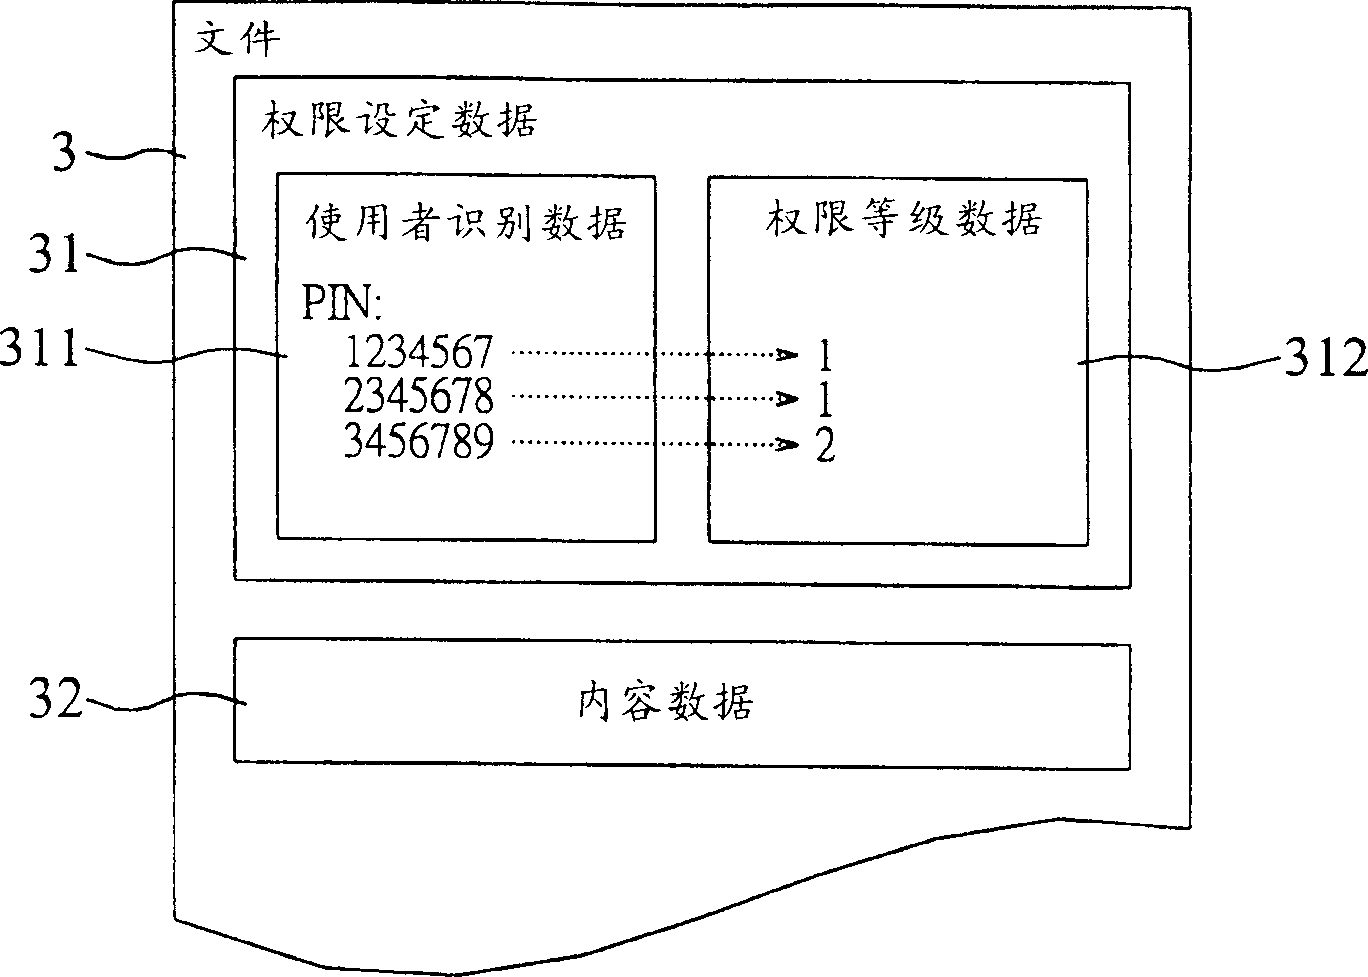 File usage authority defining system and method